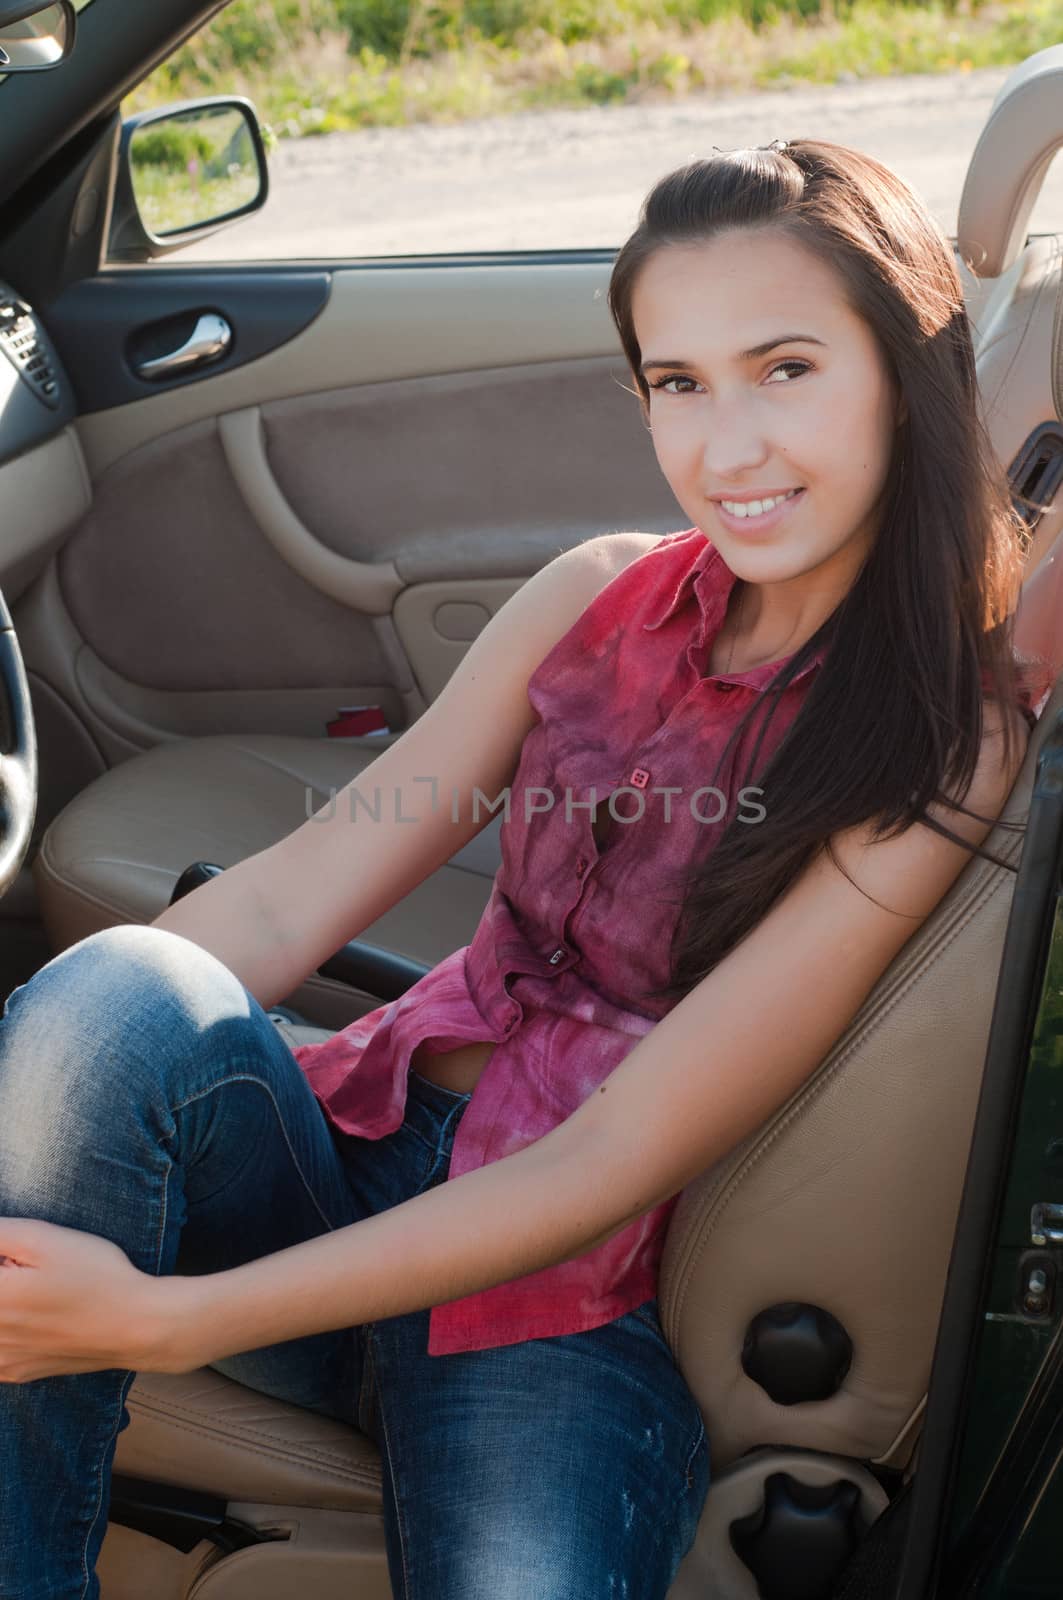 Brunette woman with long hair sitting in car